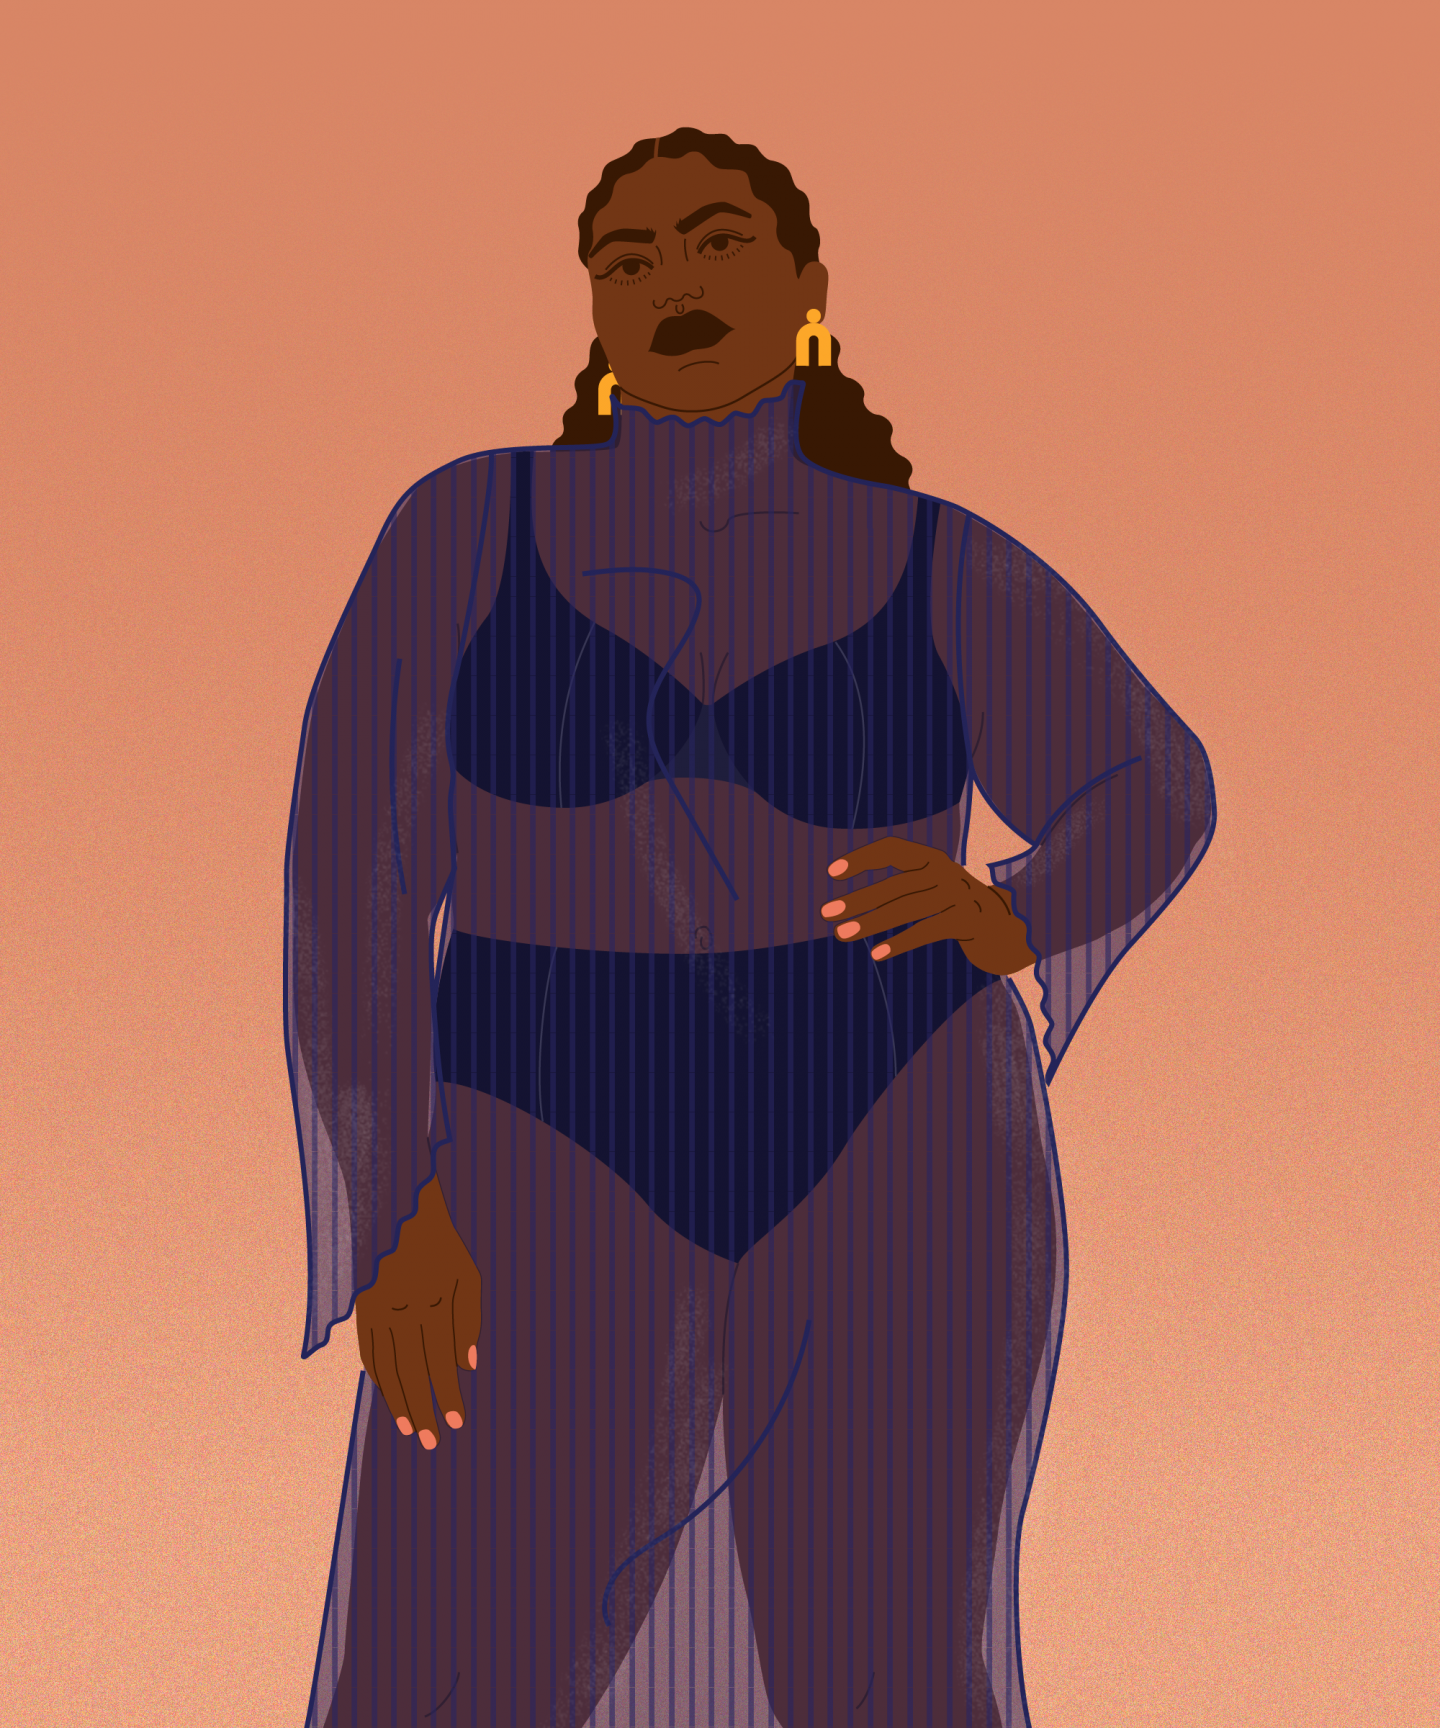 Why Plus Size Representation Has A Long Way To Go